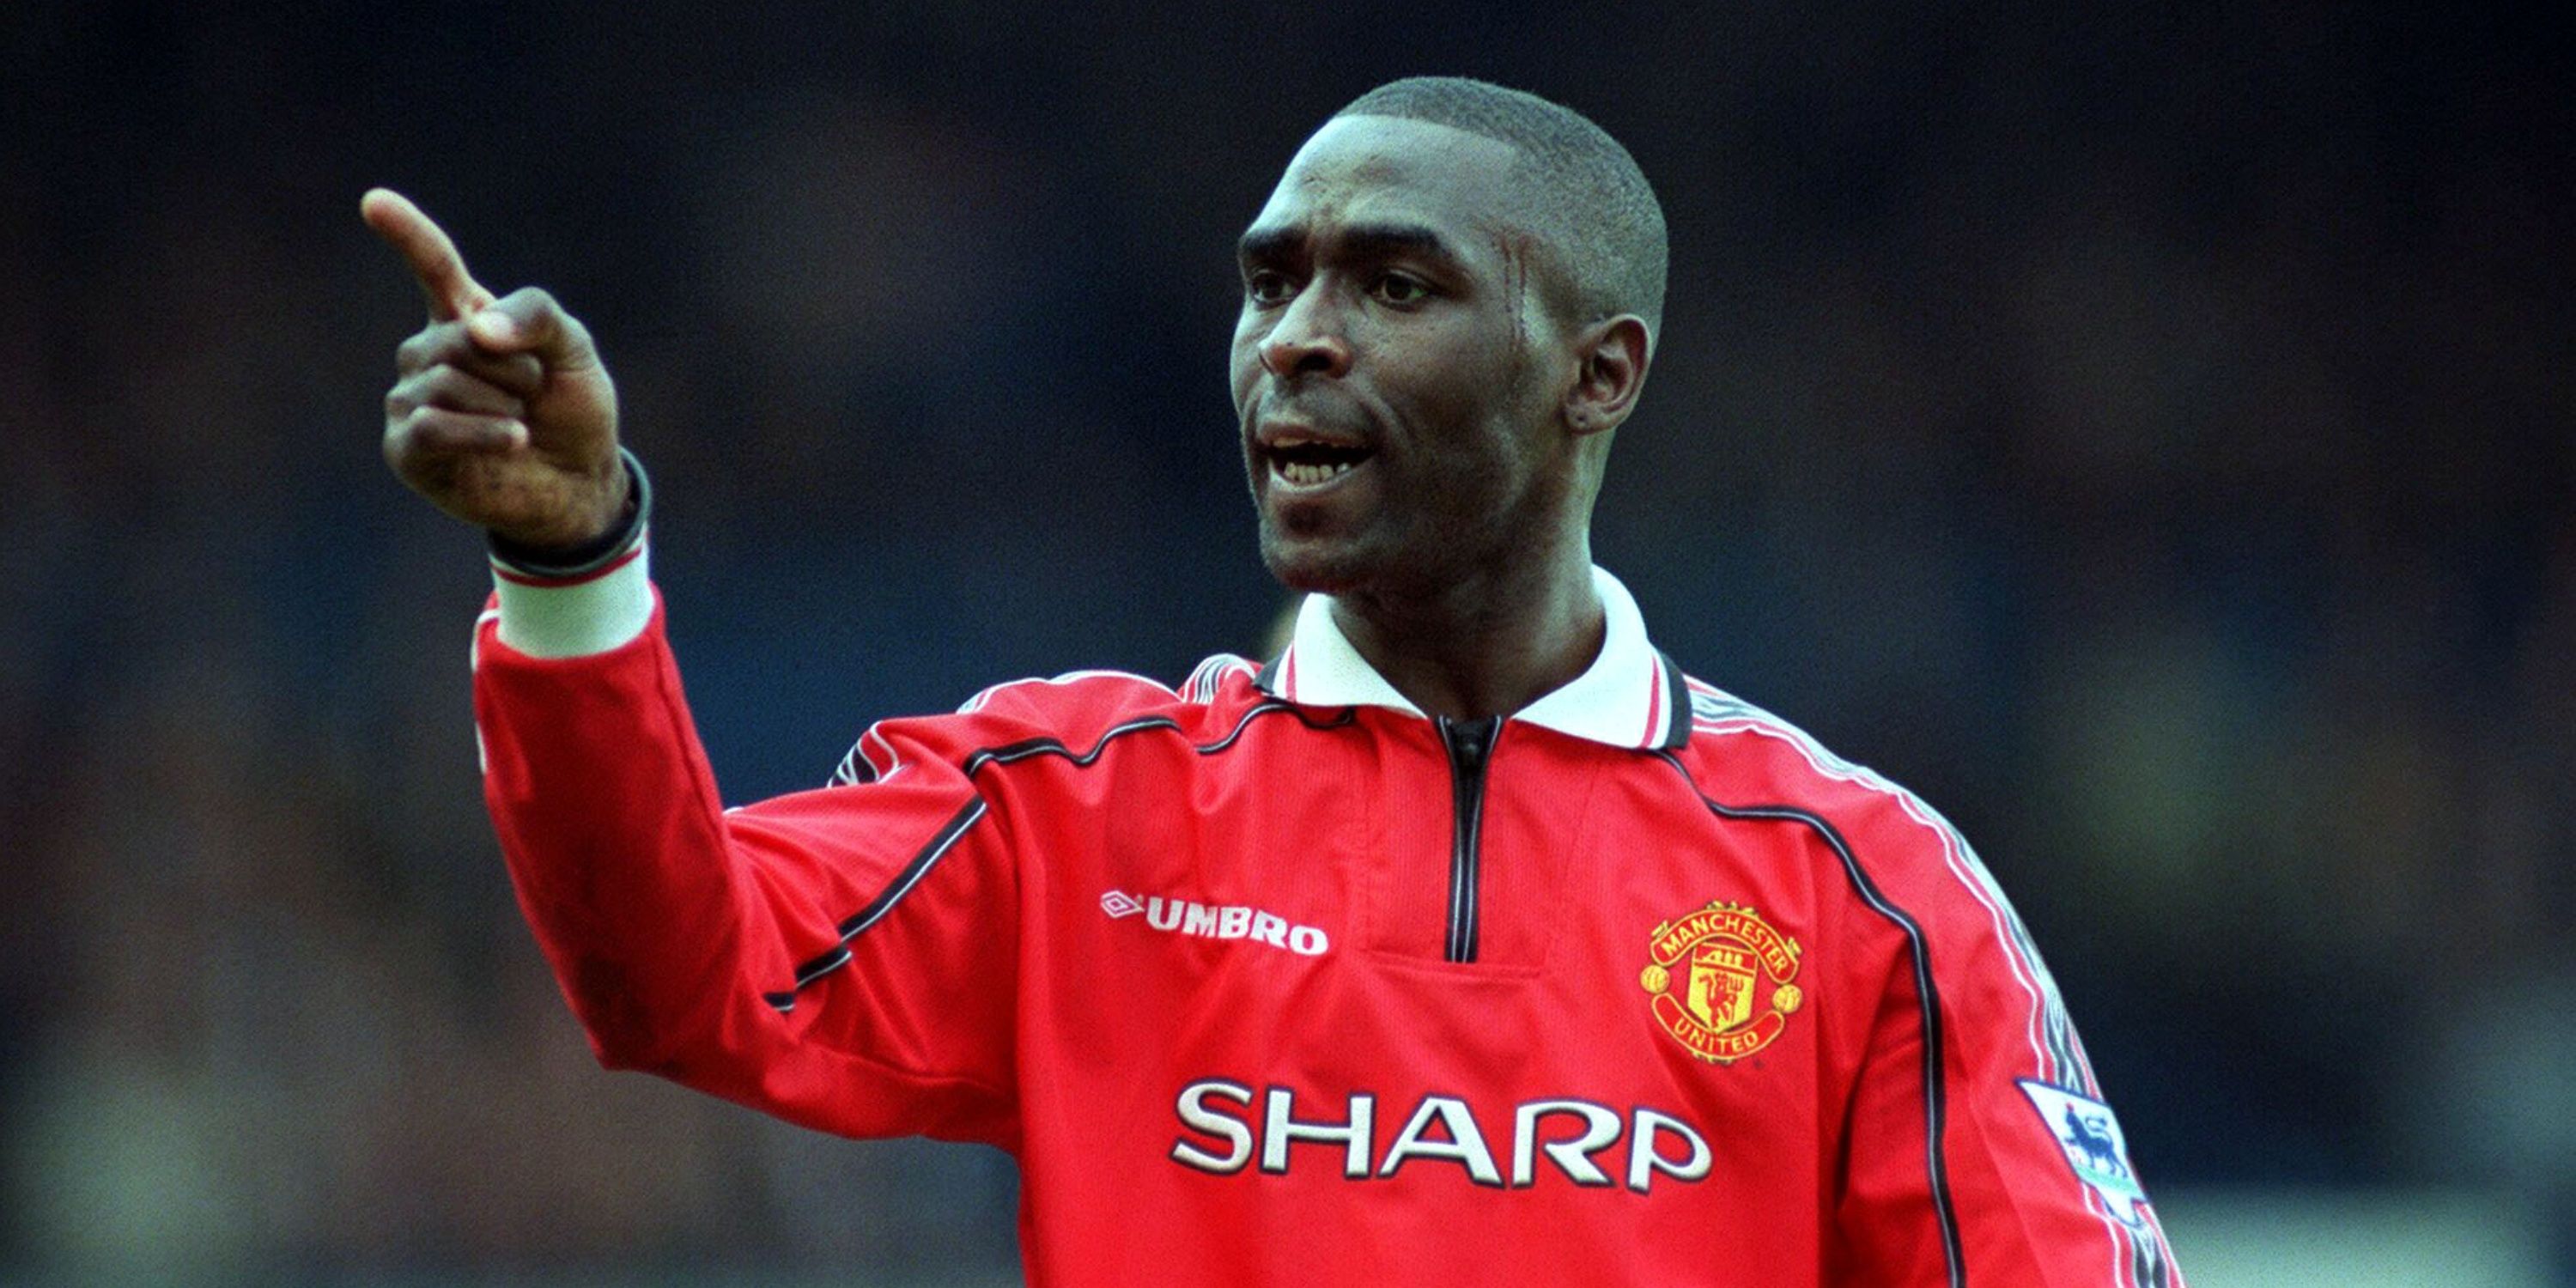 Manchester United's Andrew Cole celebrates scoring a goal.